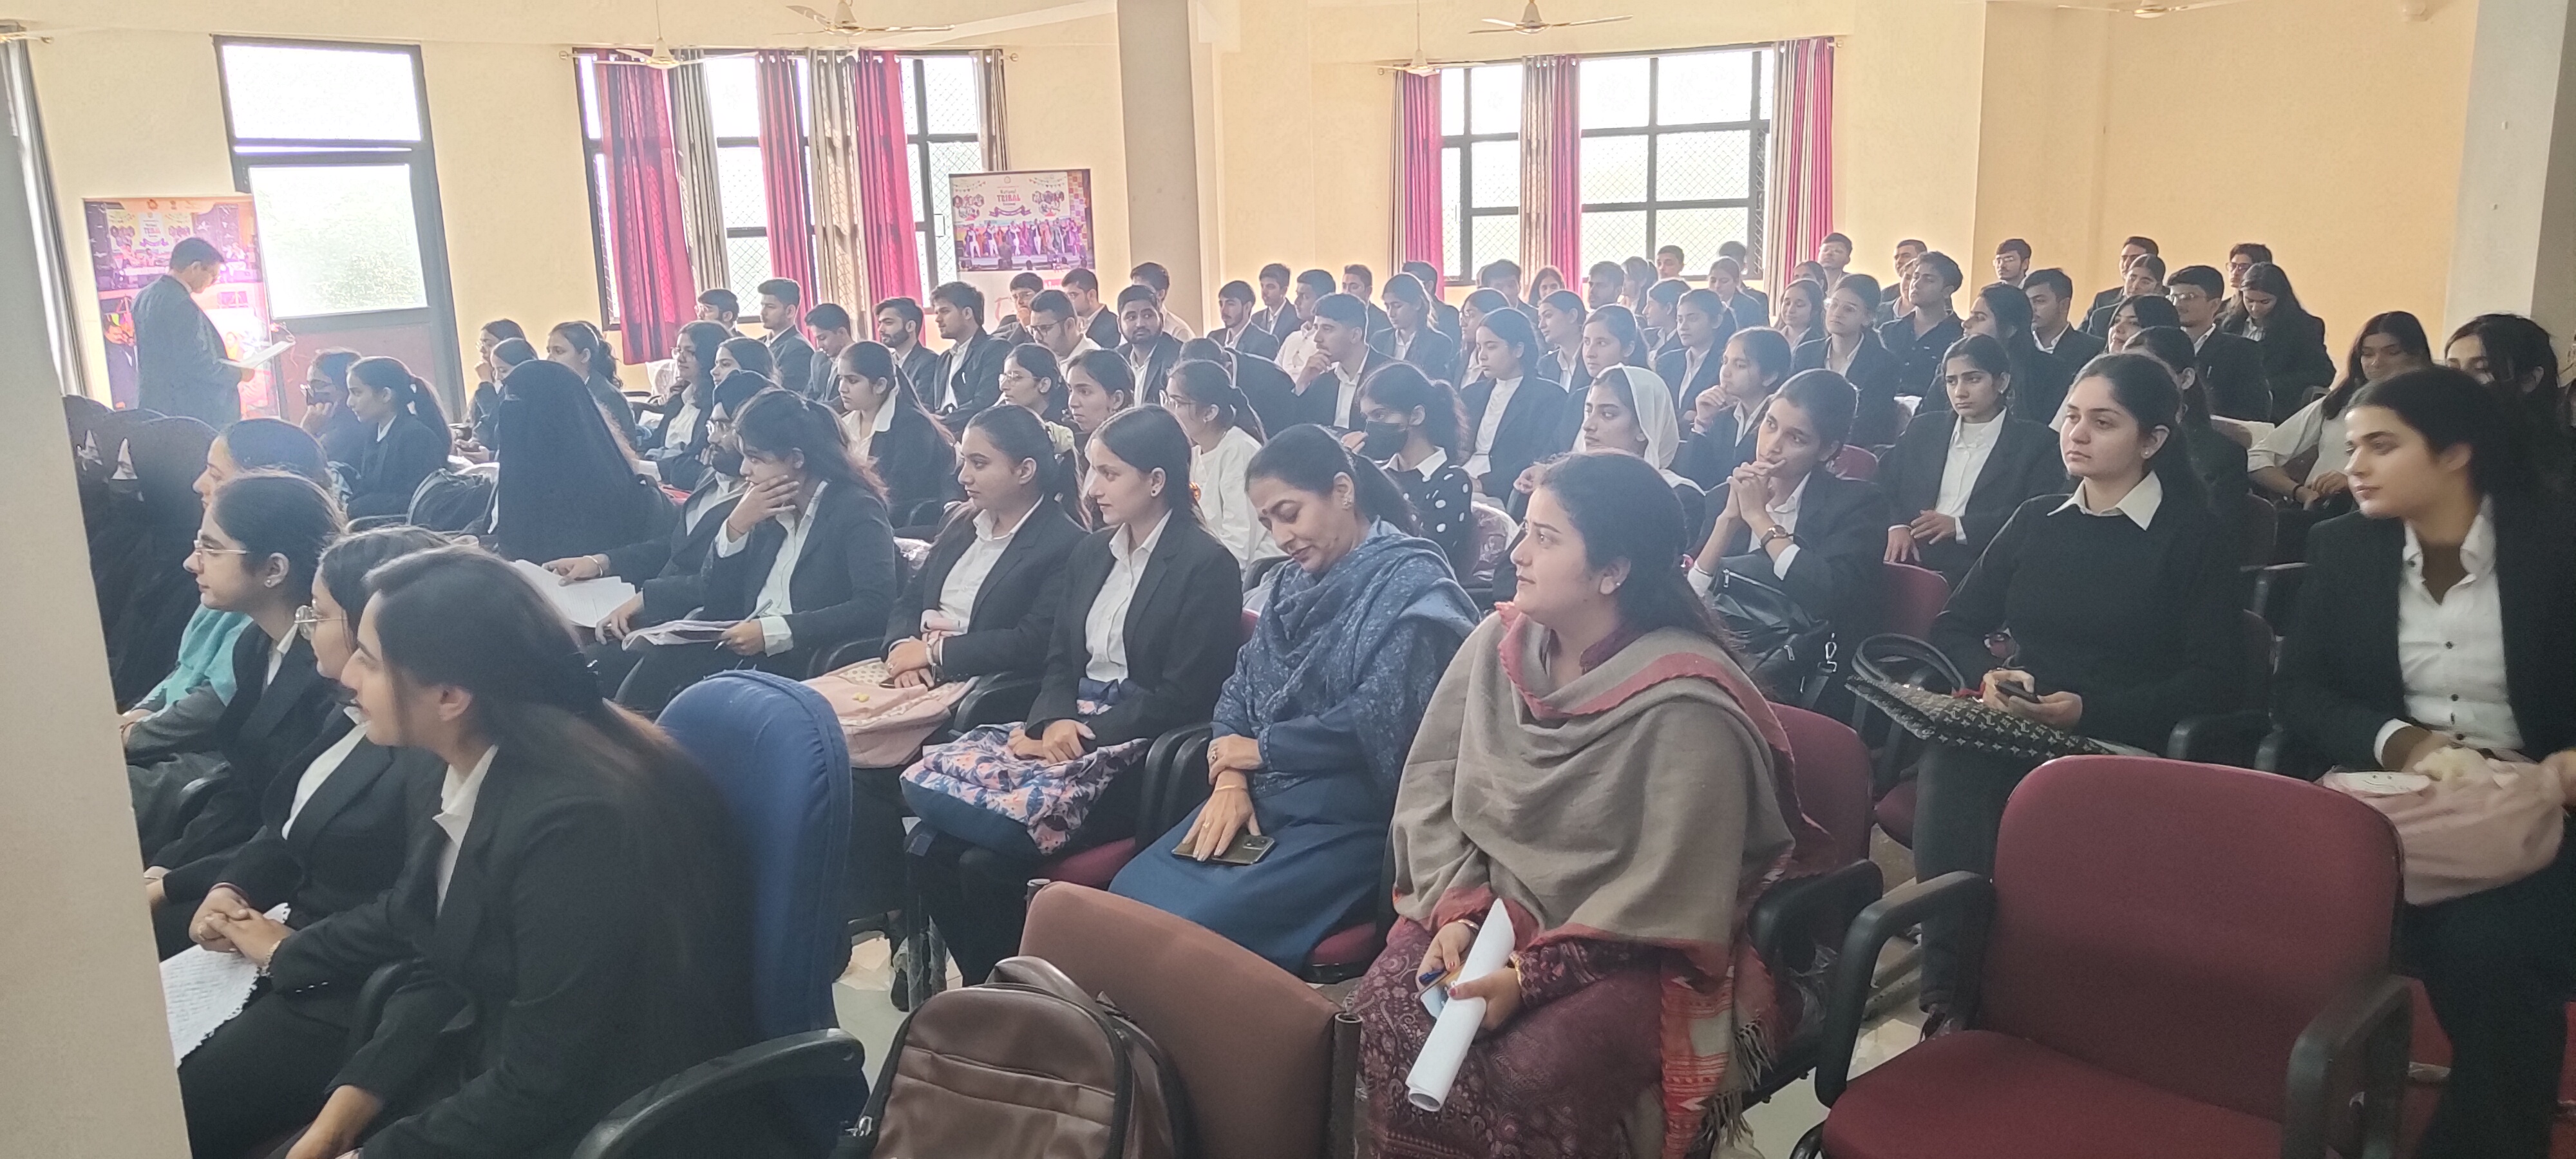 The culmination of Janjatiya Gaurav Saptah The Government of Jammu and Kashmir, Department of Tribal Affairs, in collaboration with the Law School, University of Jammu, organized a daylong Seminar on Tribal Rights and the Constitution of India.